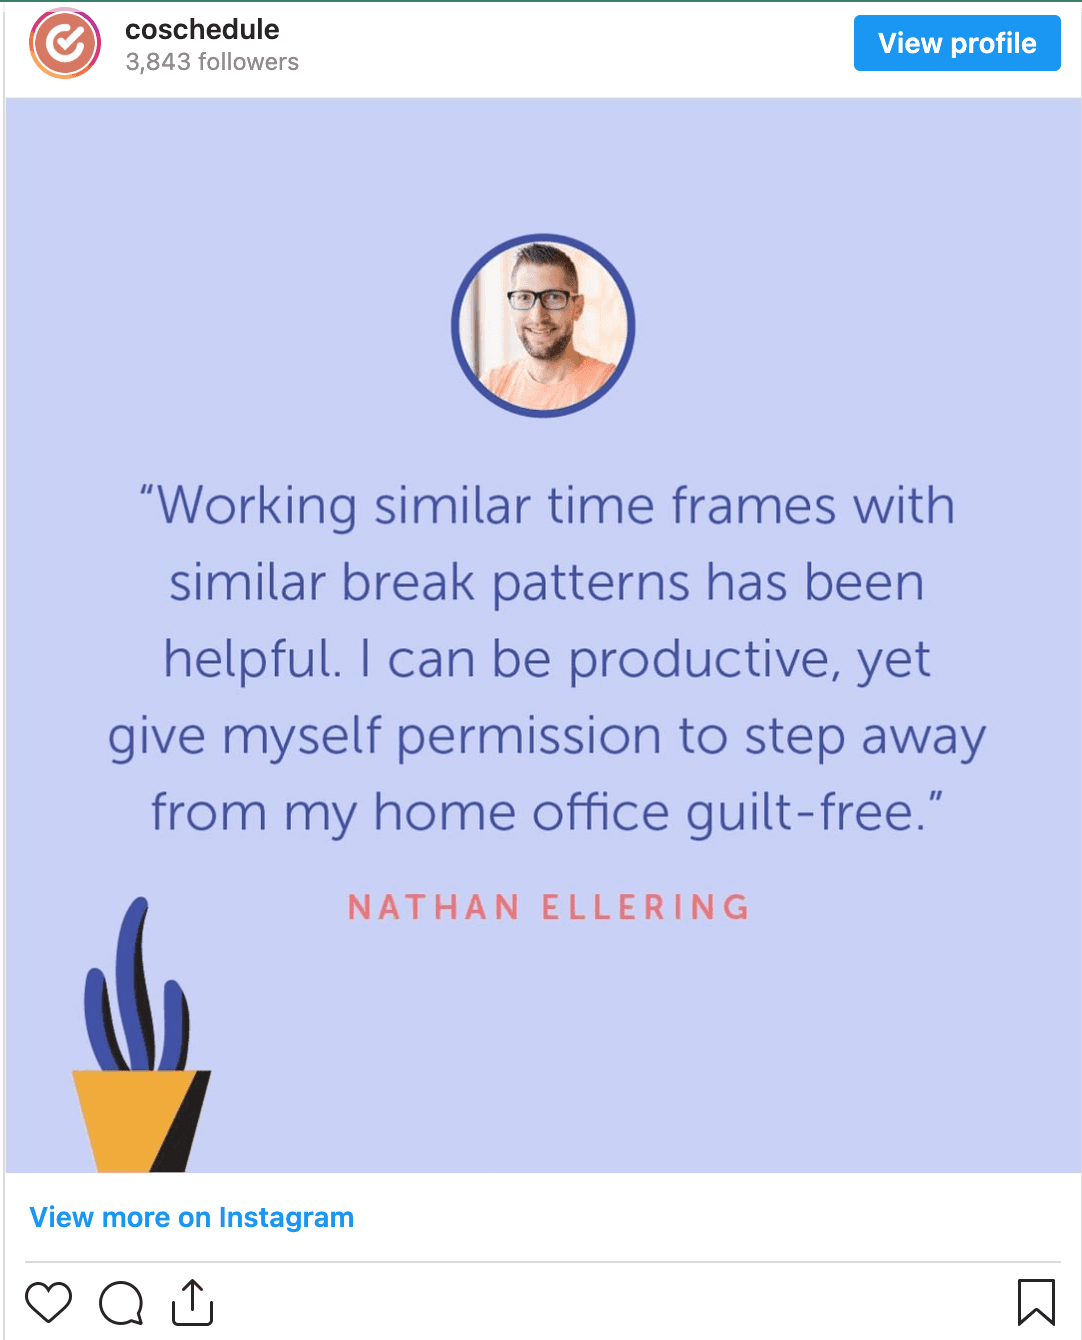 CoSchedule's Nathan Ellering quote about break patters and stepping away from work